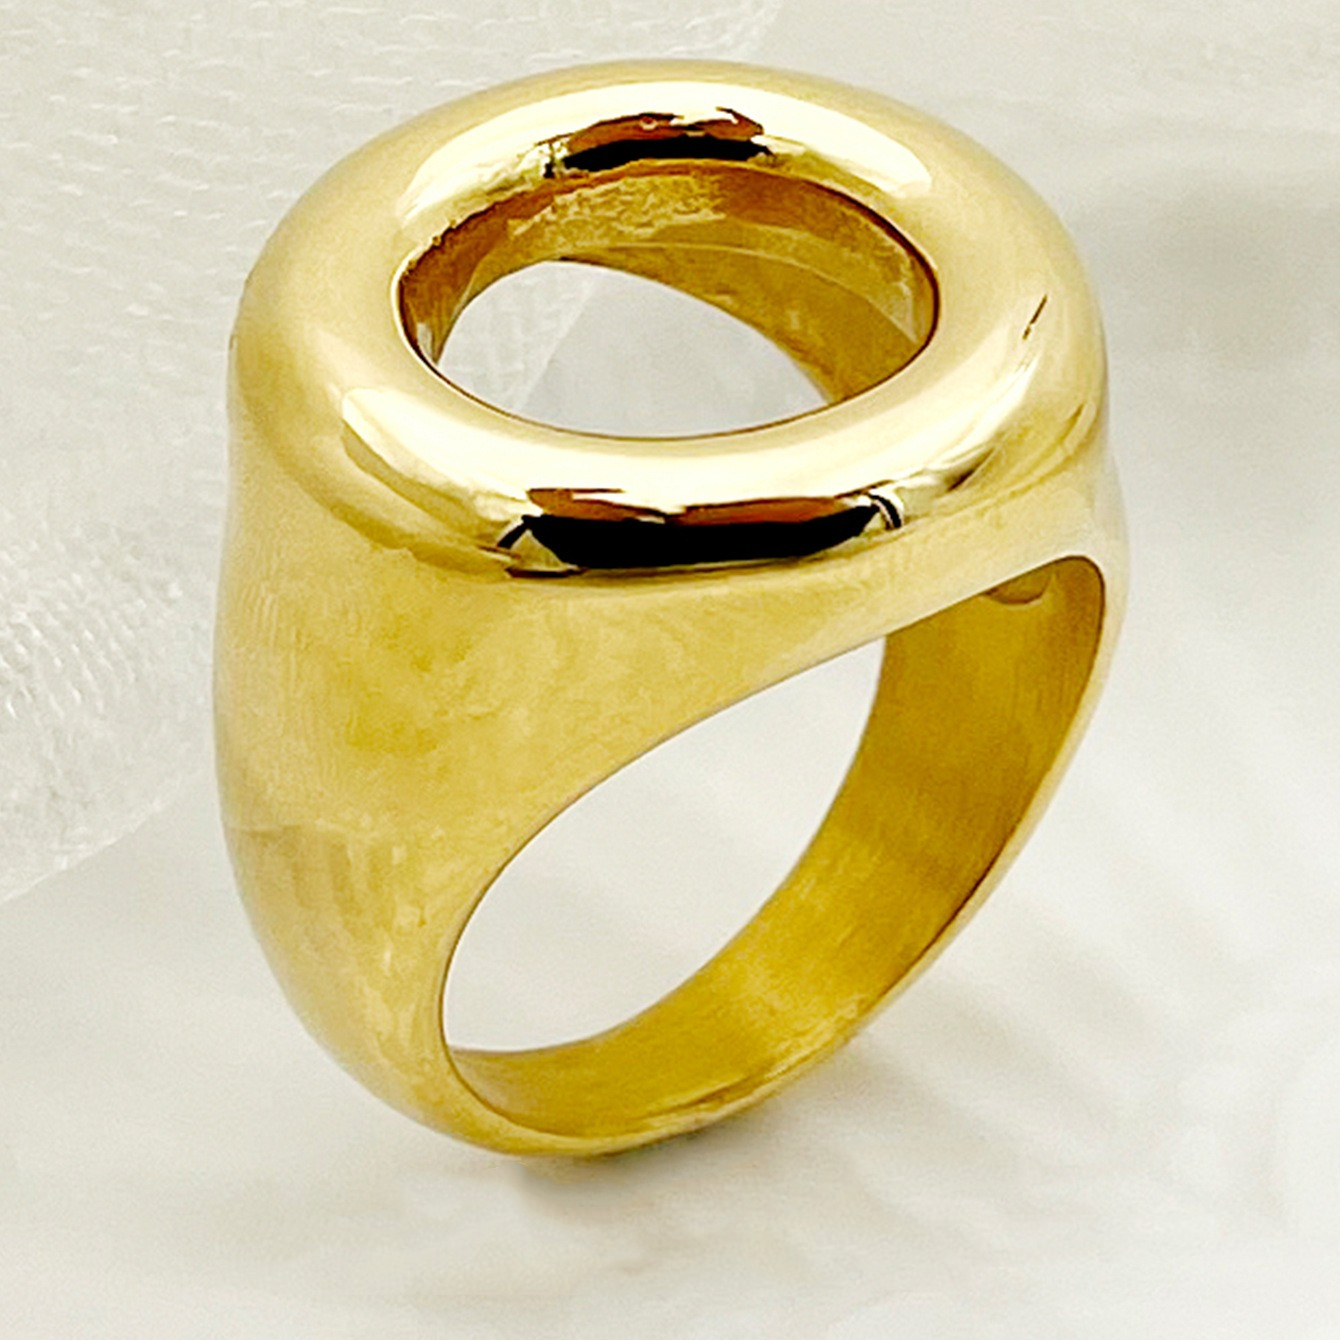 Retro, simple, fashionable, personalized, light and luxurious circular ring design, stainless steel gold-plated versatile ring